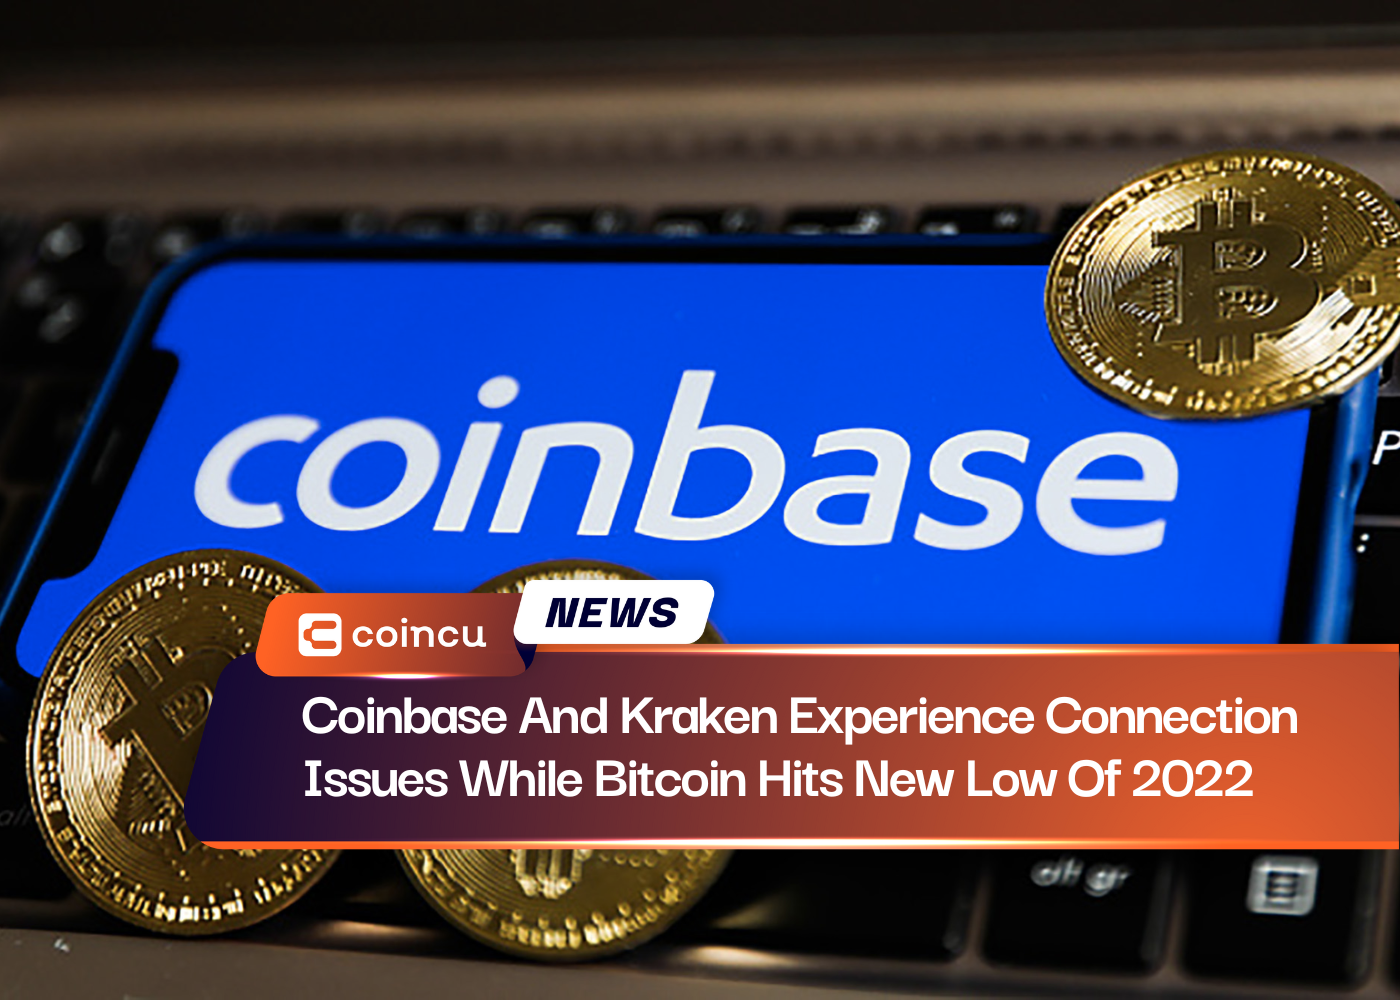 Coinbase And Kraken Experience Connection Issues While Bitcoin Hits New Low Of 2022